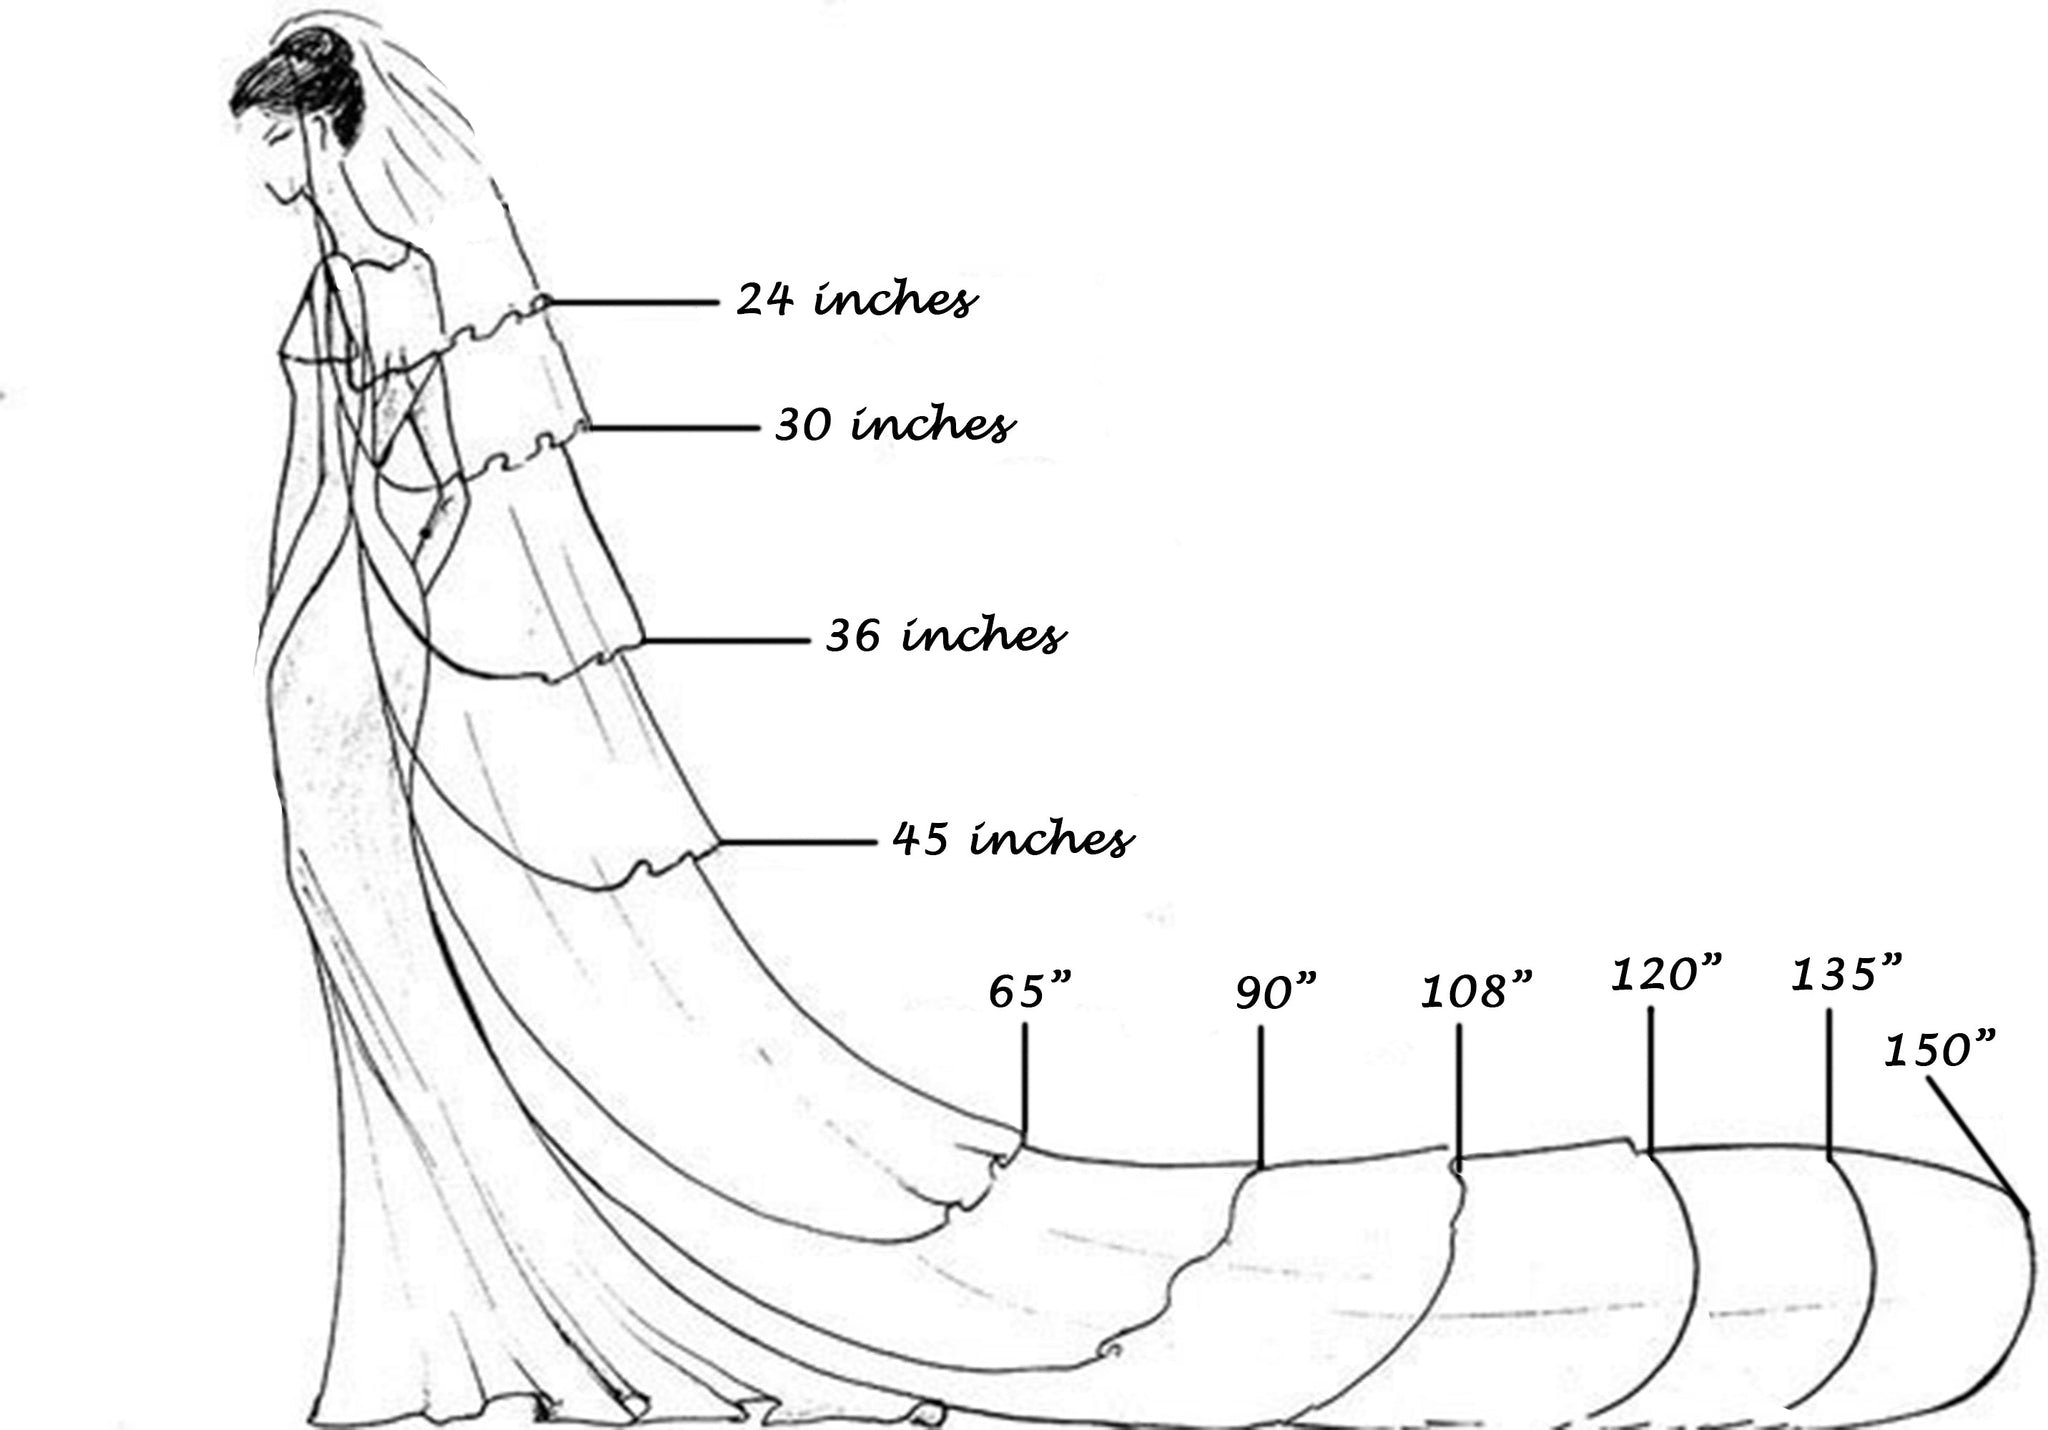 2-tier wide cathedral wedding veil